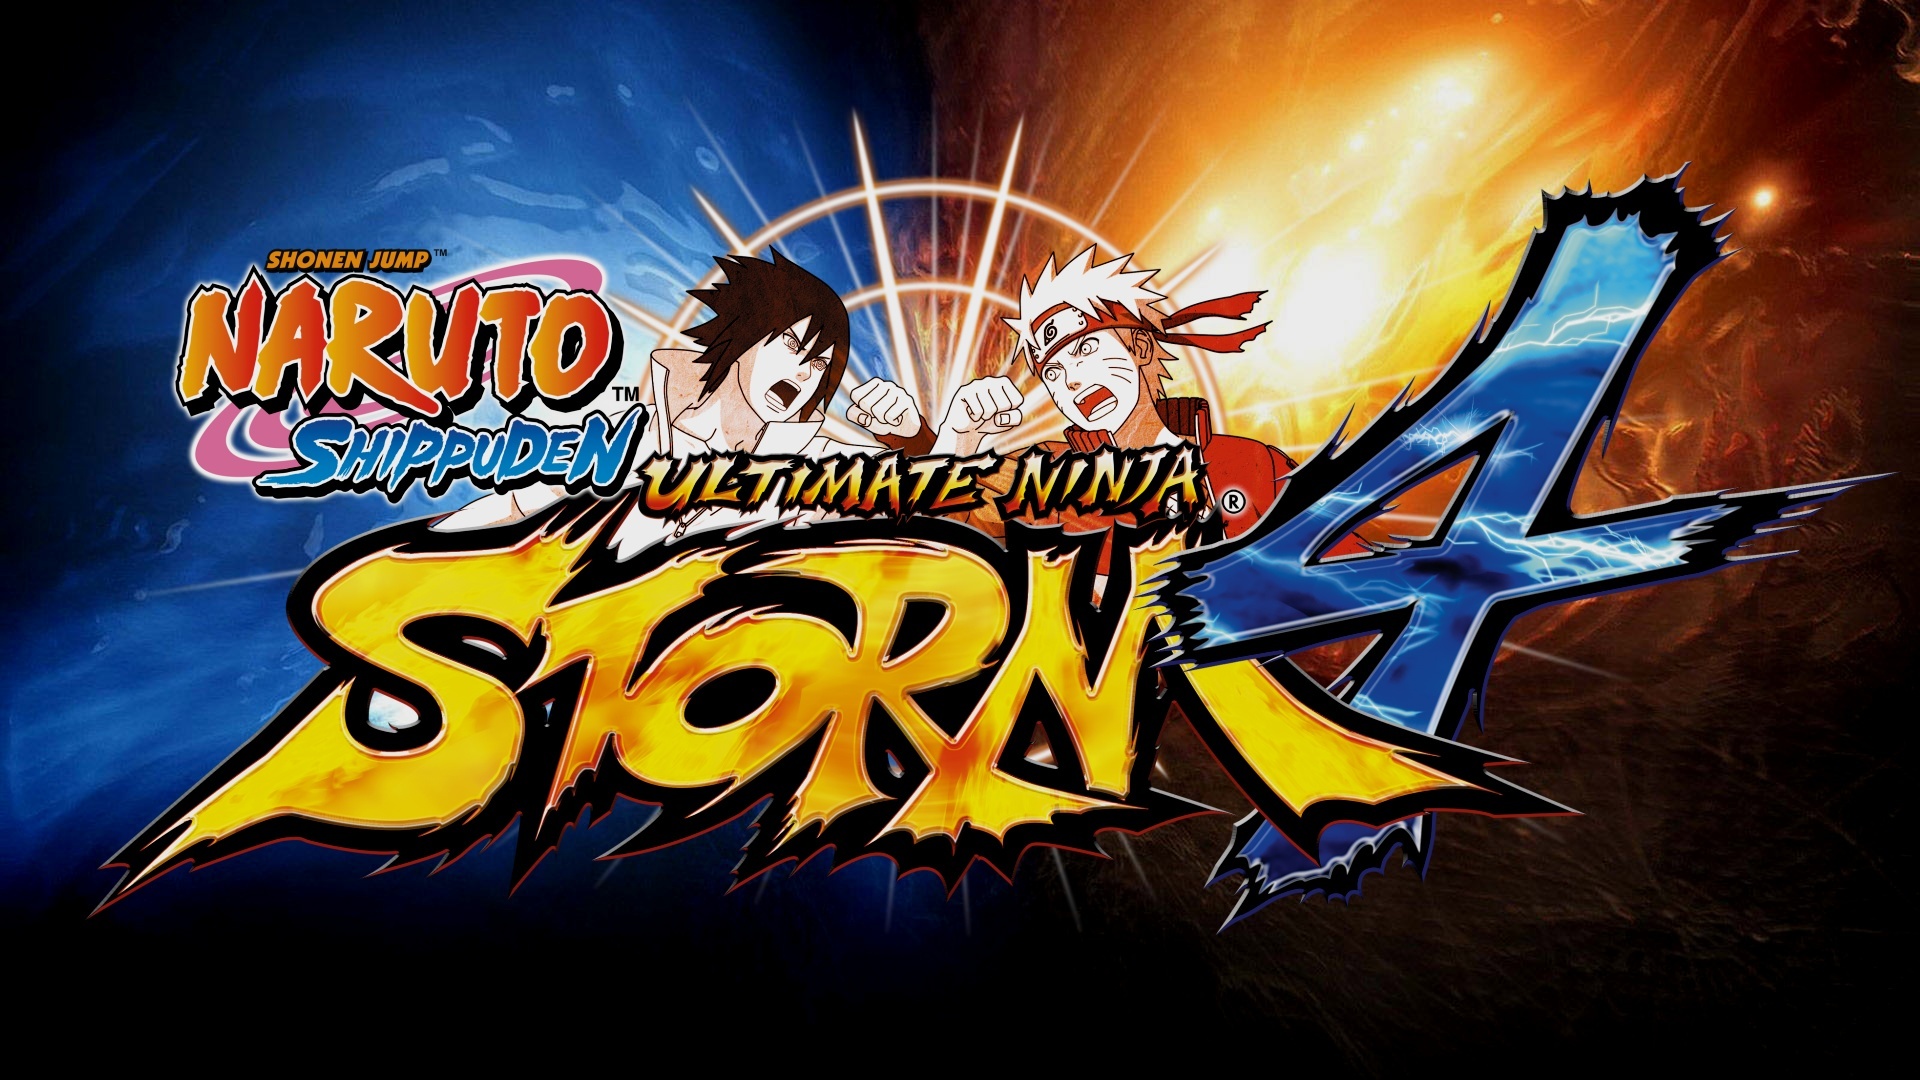 switch characters in naruto storm 4